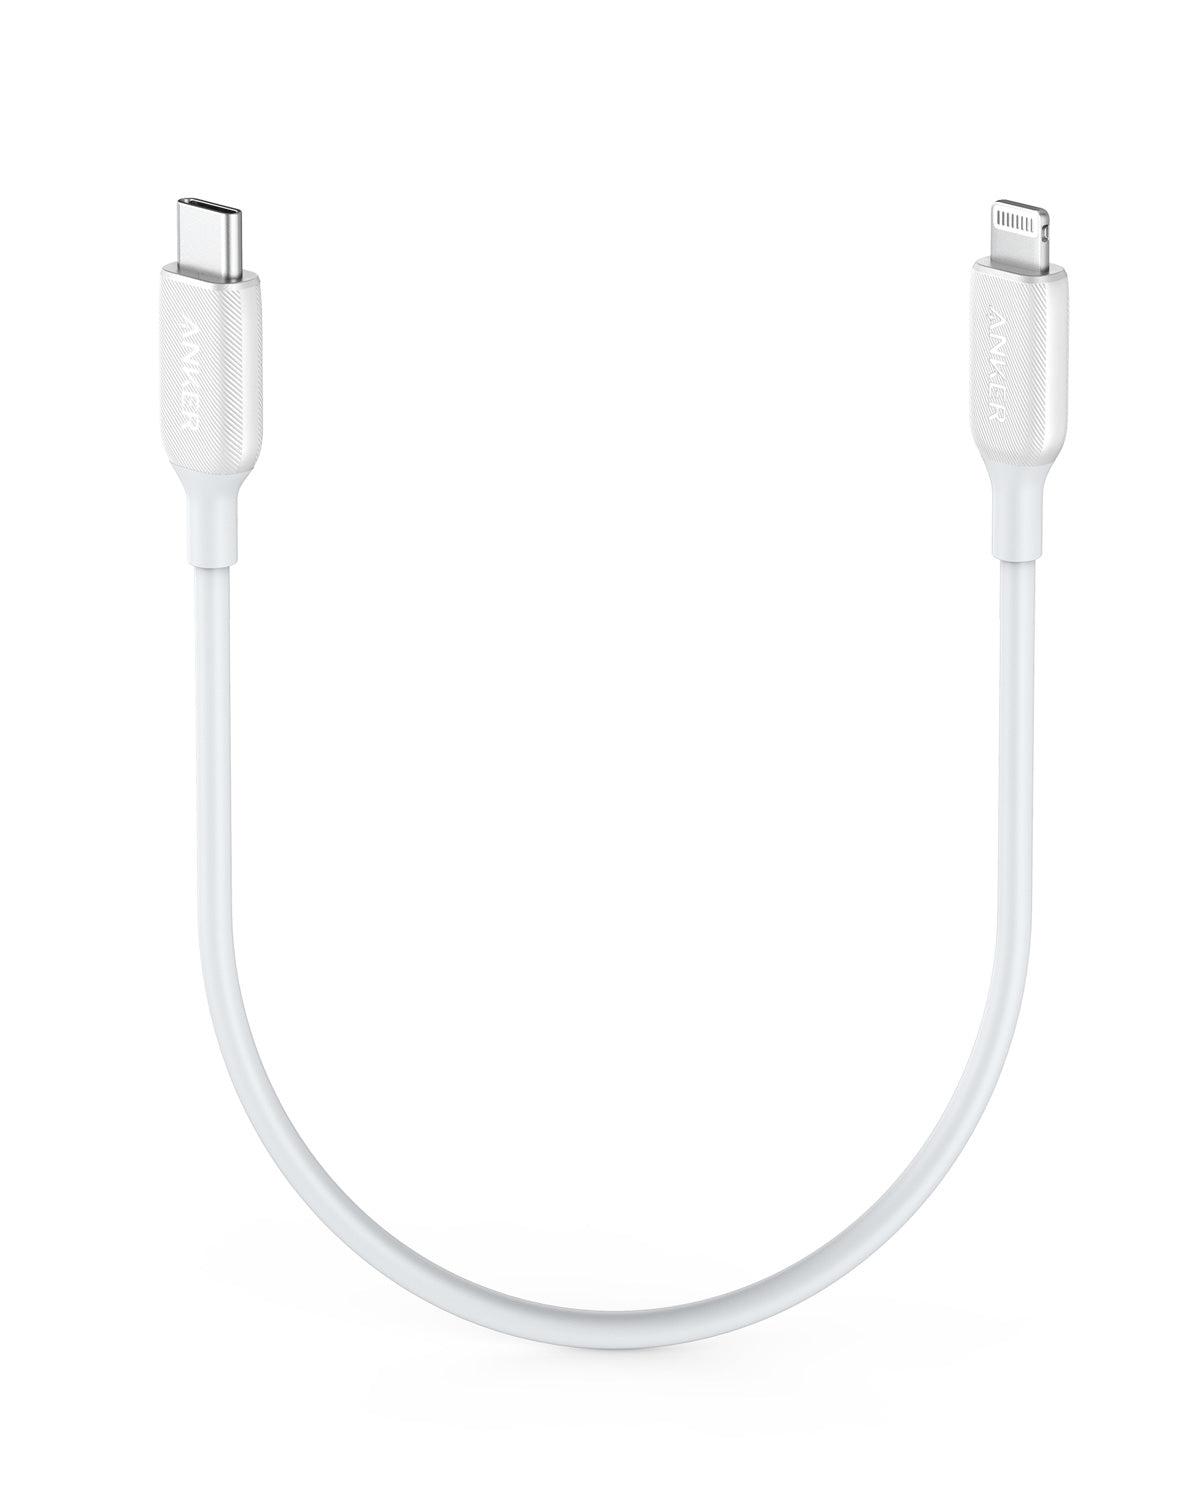 Anker <b>541</b> USB-C to Lightning Cable